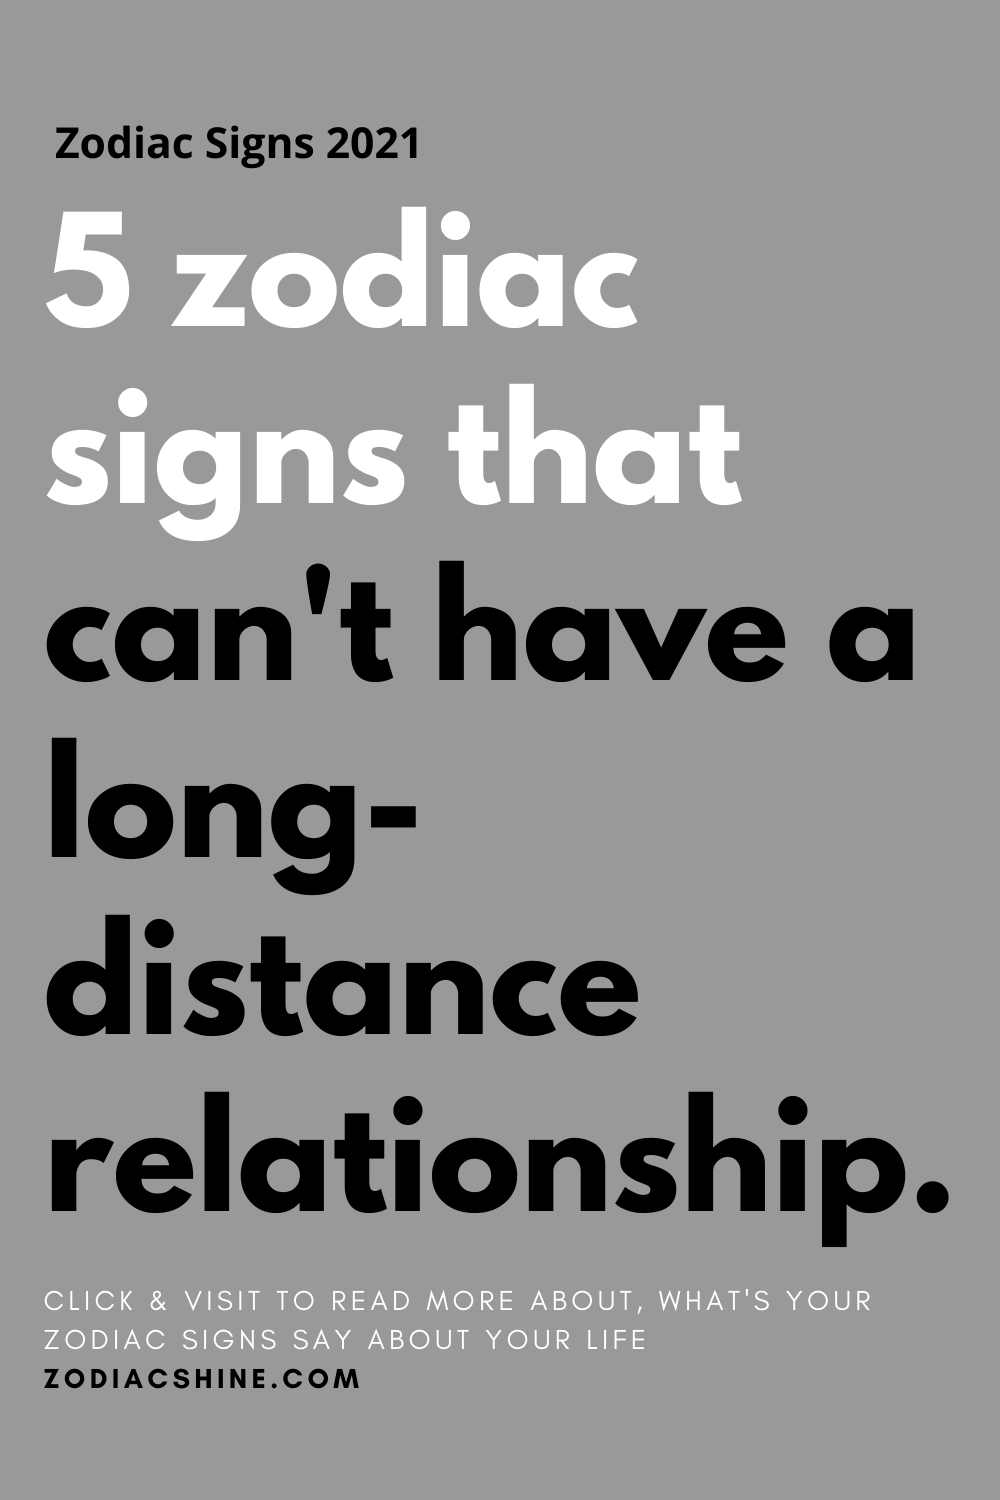 5 zodiac signs that can't have a long-distance relationship.